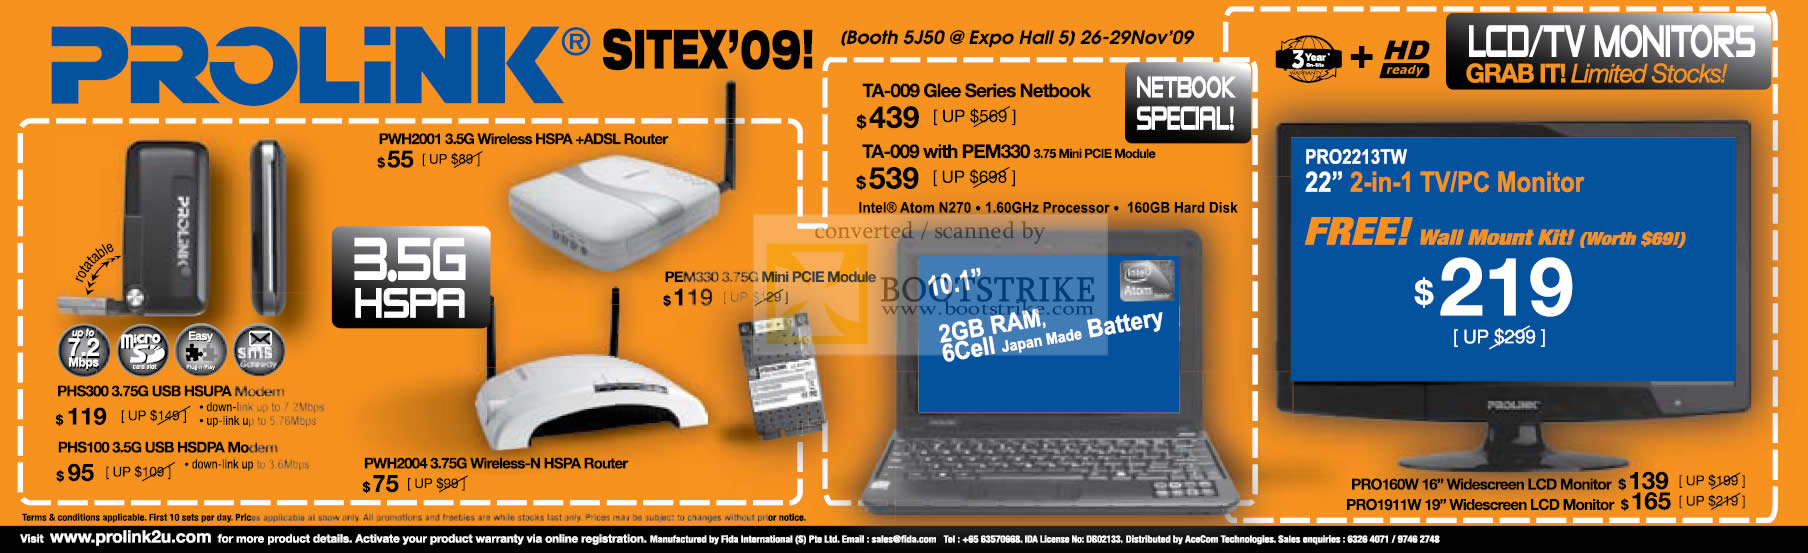 Sitex 2009 price list image brochure of Prolink Wireless Router HSPA Netbook TA 009 LCD TV Monitor PRO160W